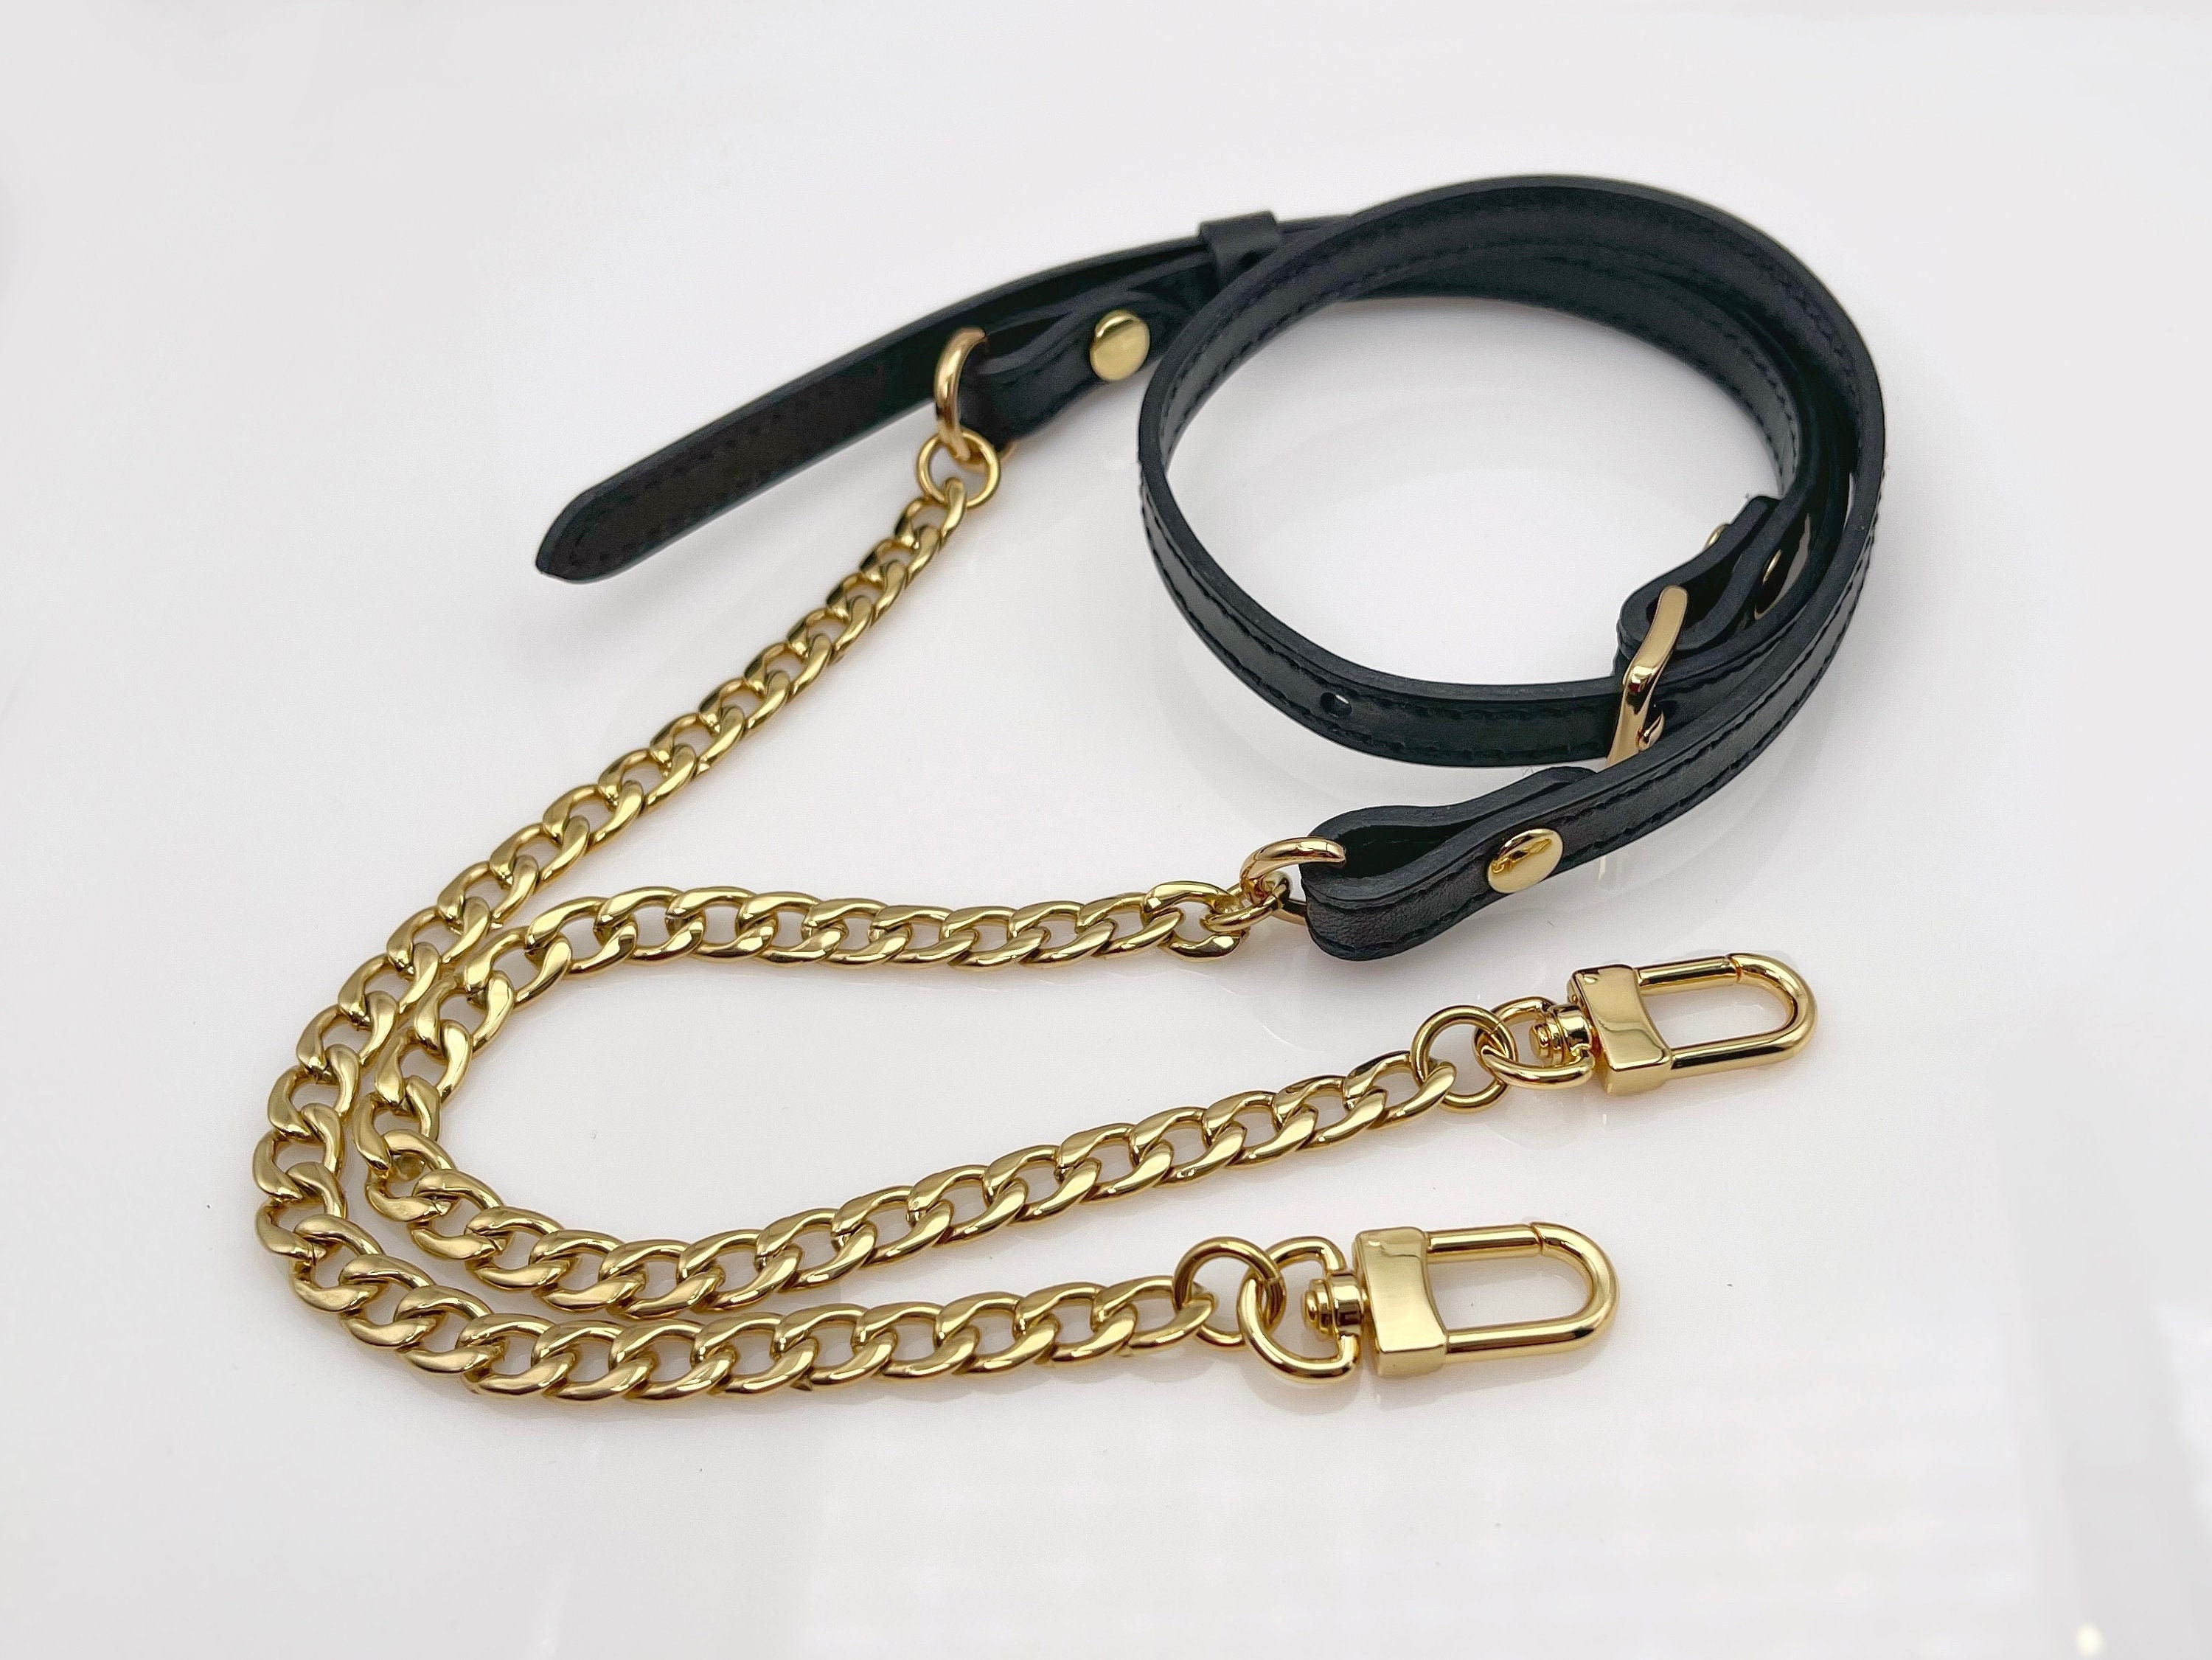 LSLeatherStudio Genuine Leather Chain Strap, High-Quality Leather Strap with Chain for Bags, Shoulder Wallet Chain Purse Strap, Crossbody Strap